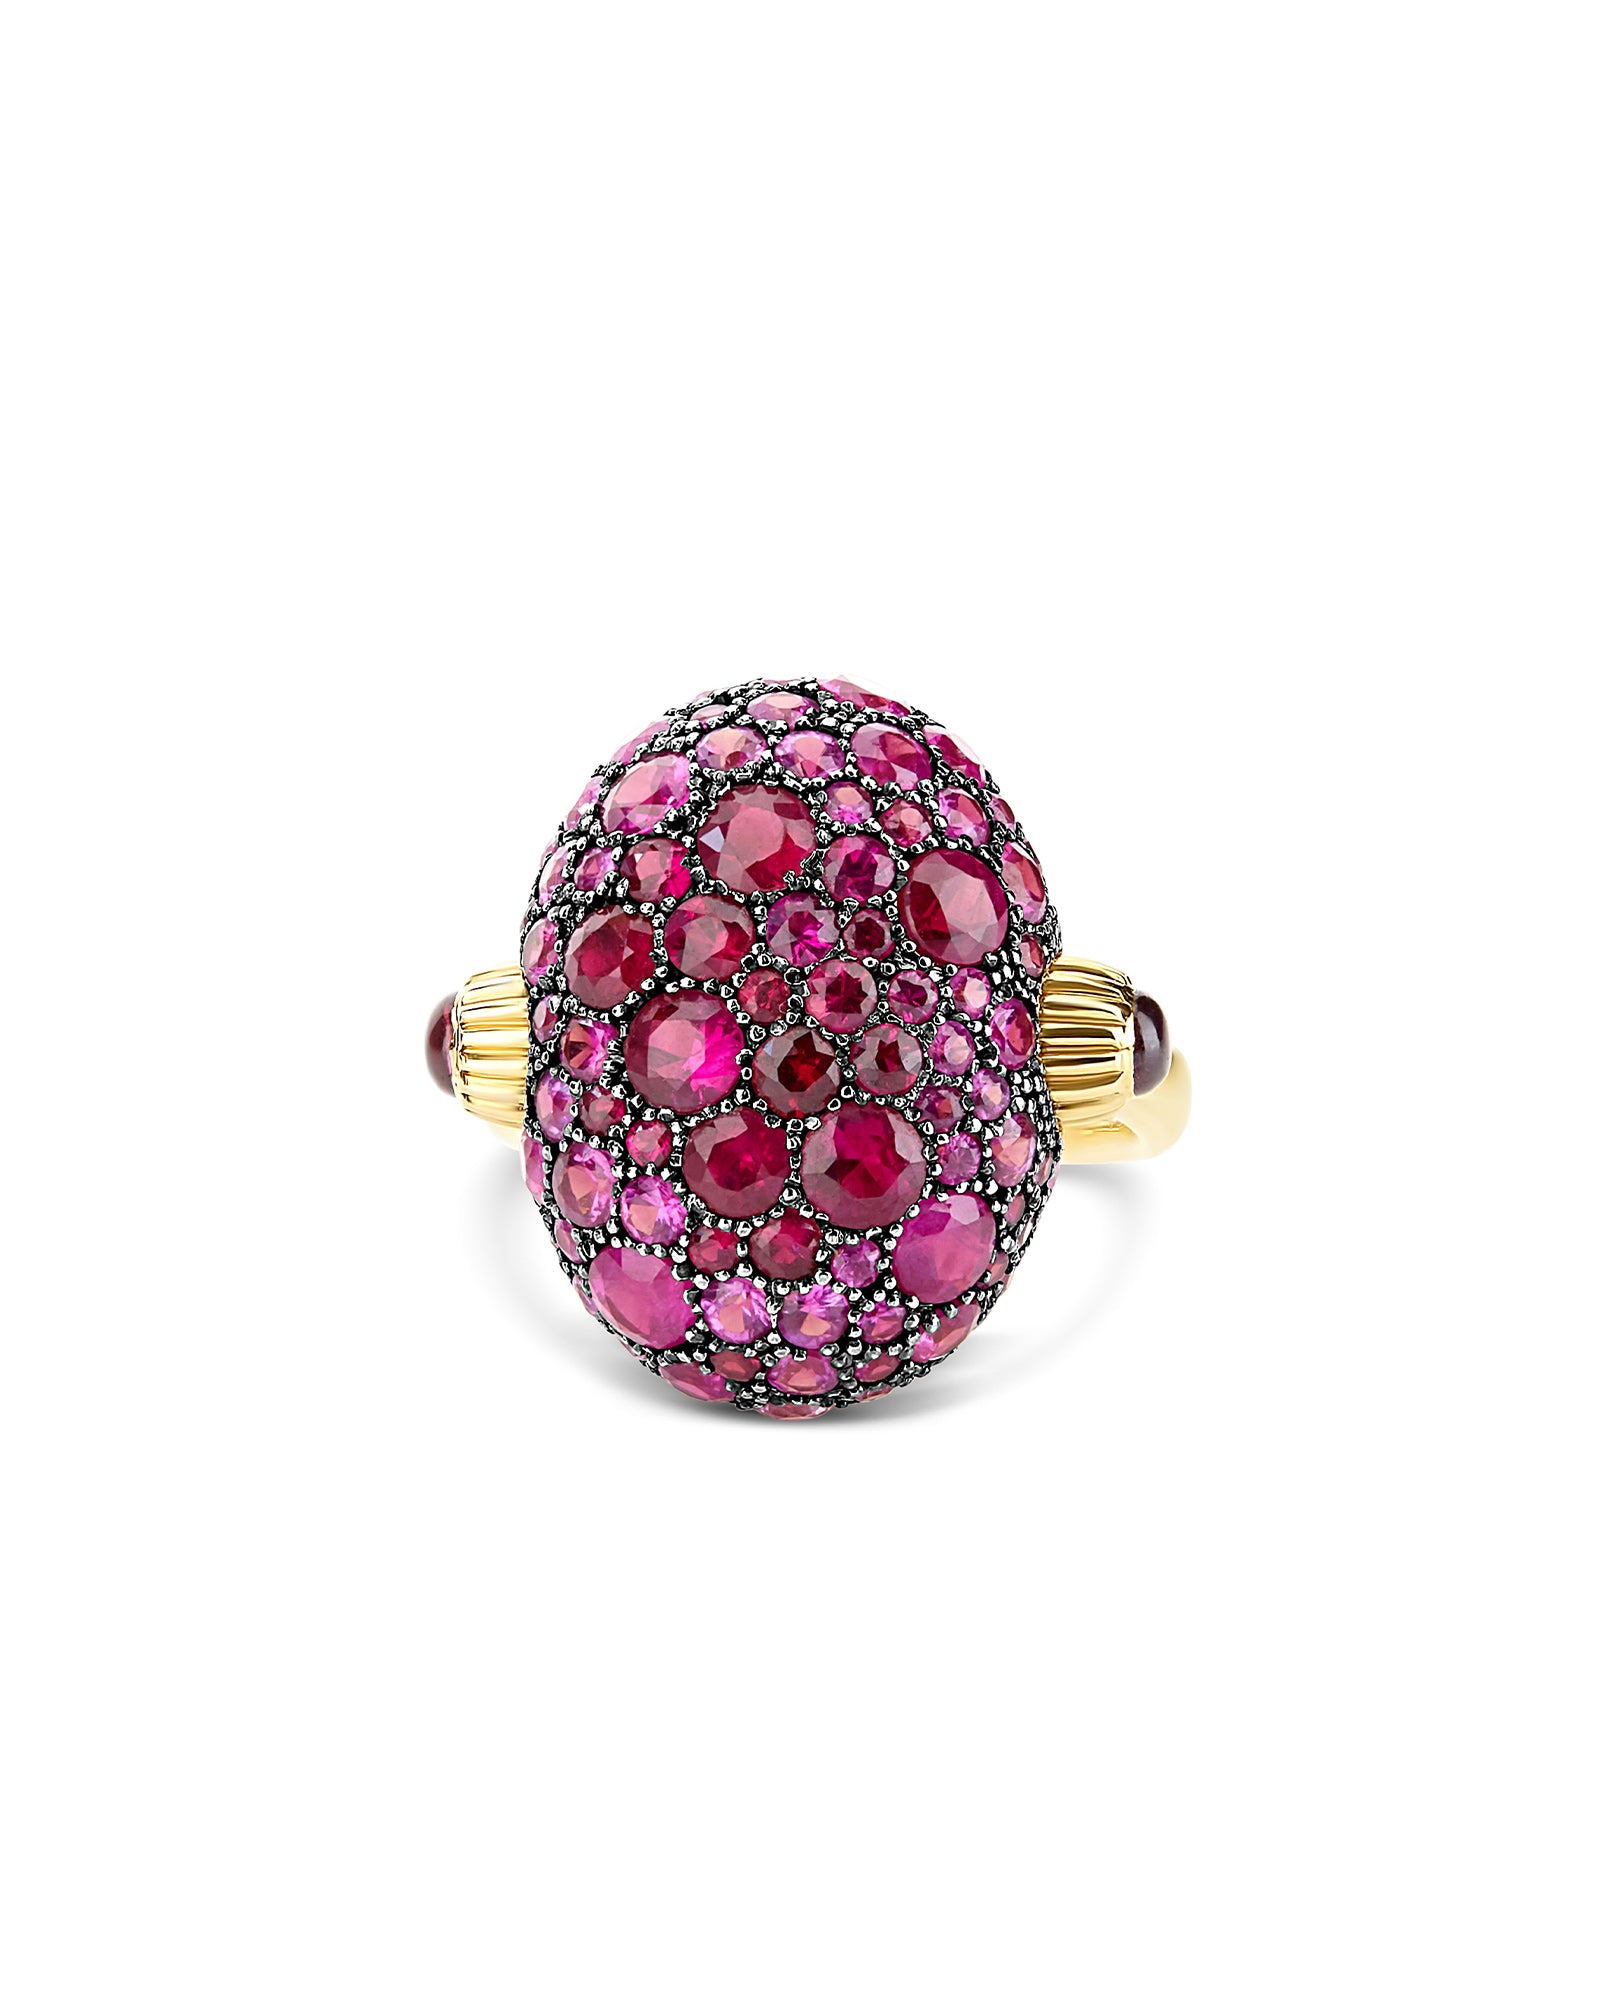 "Reverse" Gold, Pink Sapphires, Rubies, White Australian Opal and Diamonds Double-face Ring (LARGE)